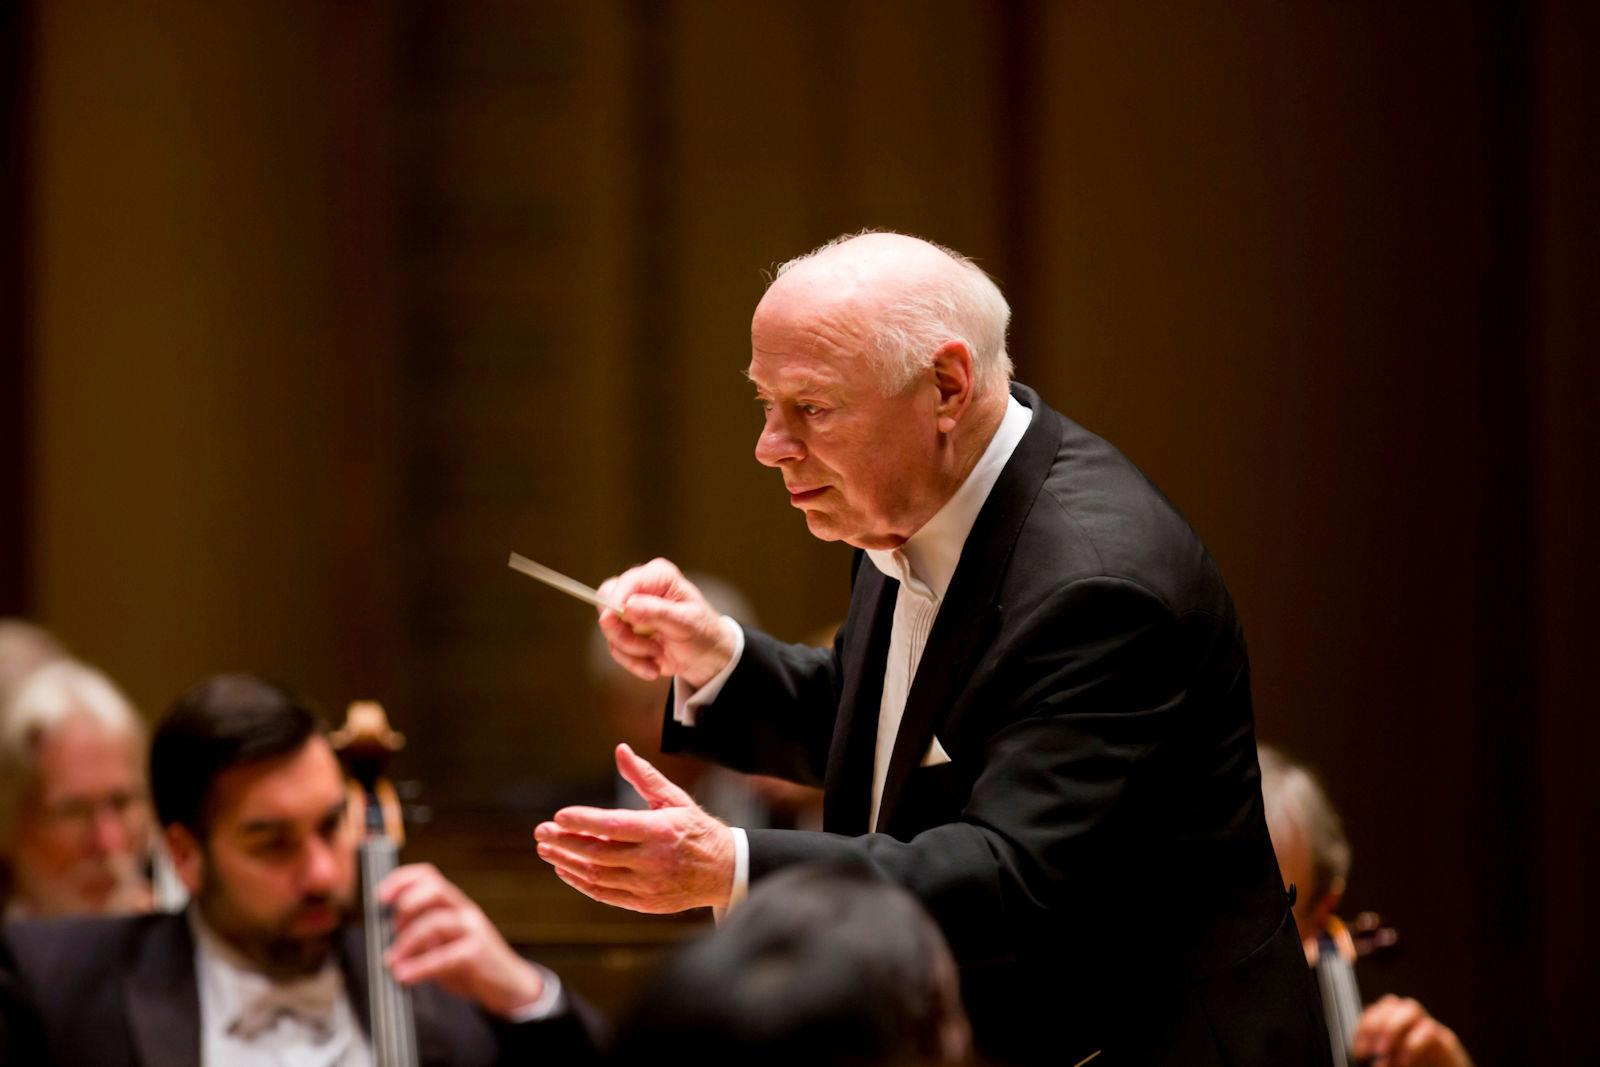 Haitink and the Vienna Phil